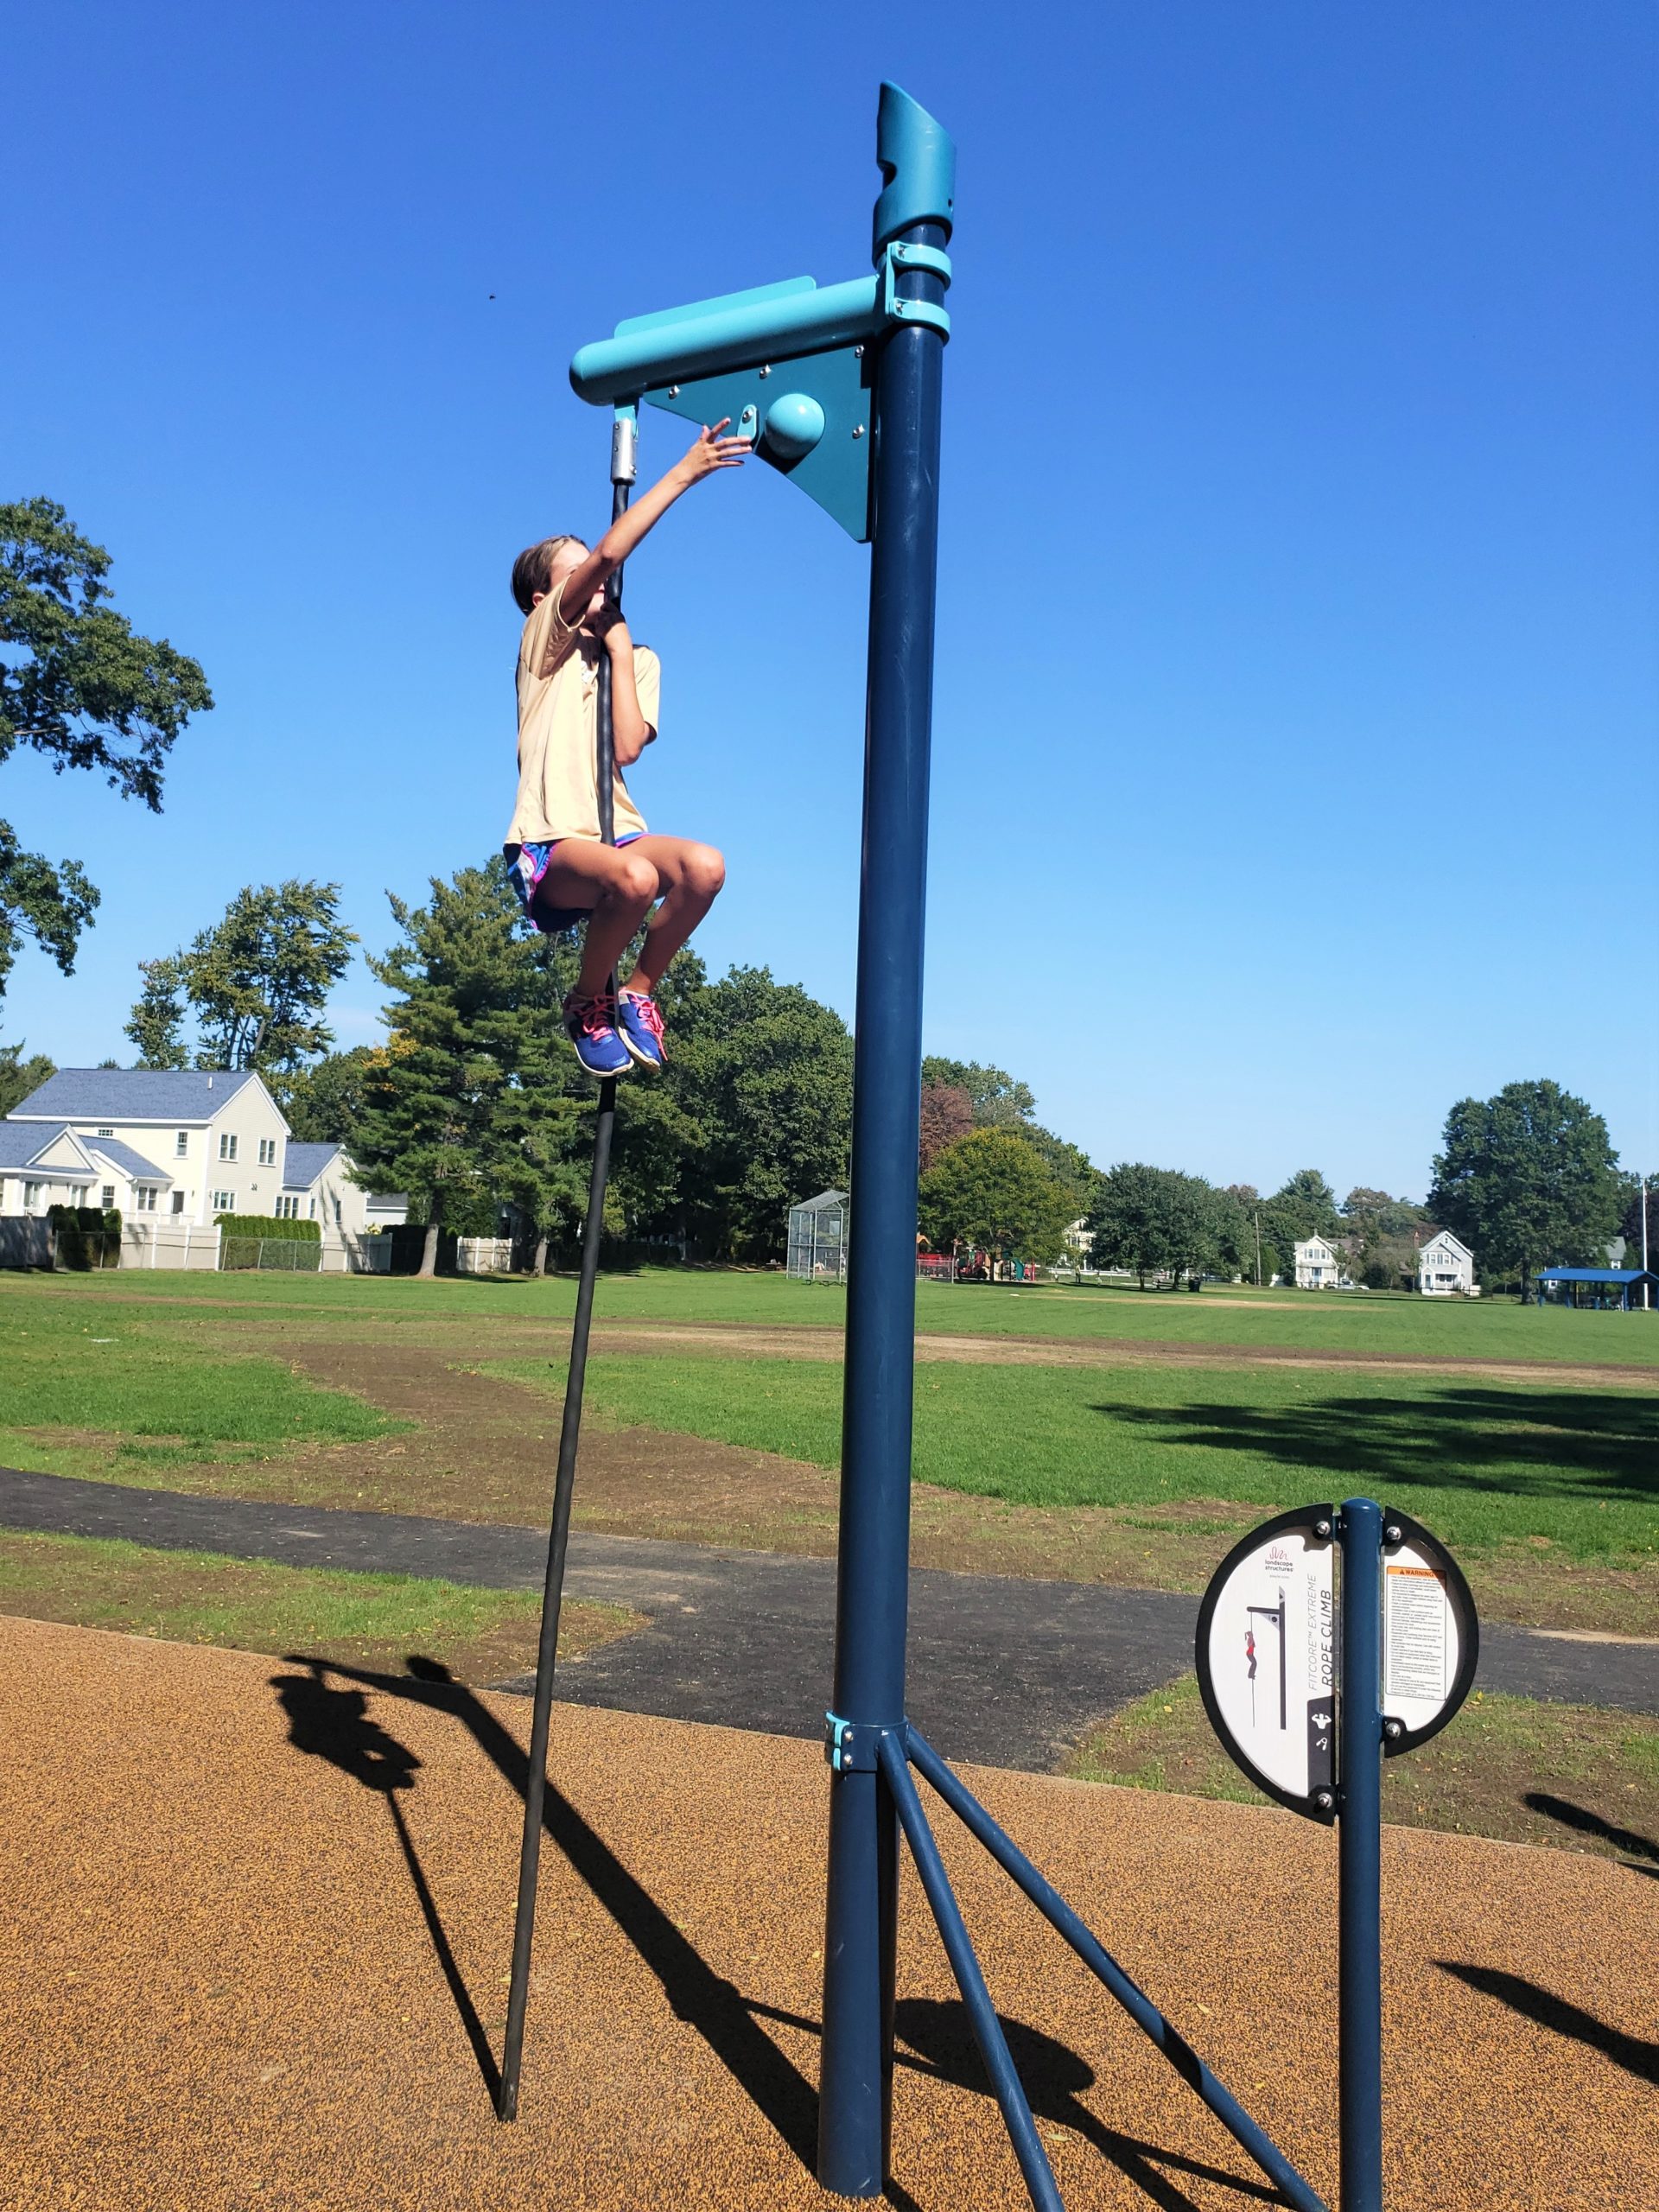 Landscape Structures Fitcore Extreme Ages 13+ Rope Climb Concord Massachusetts